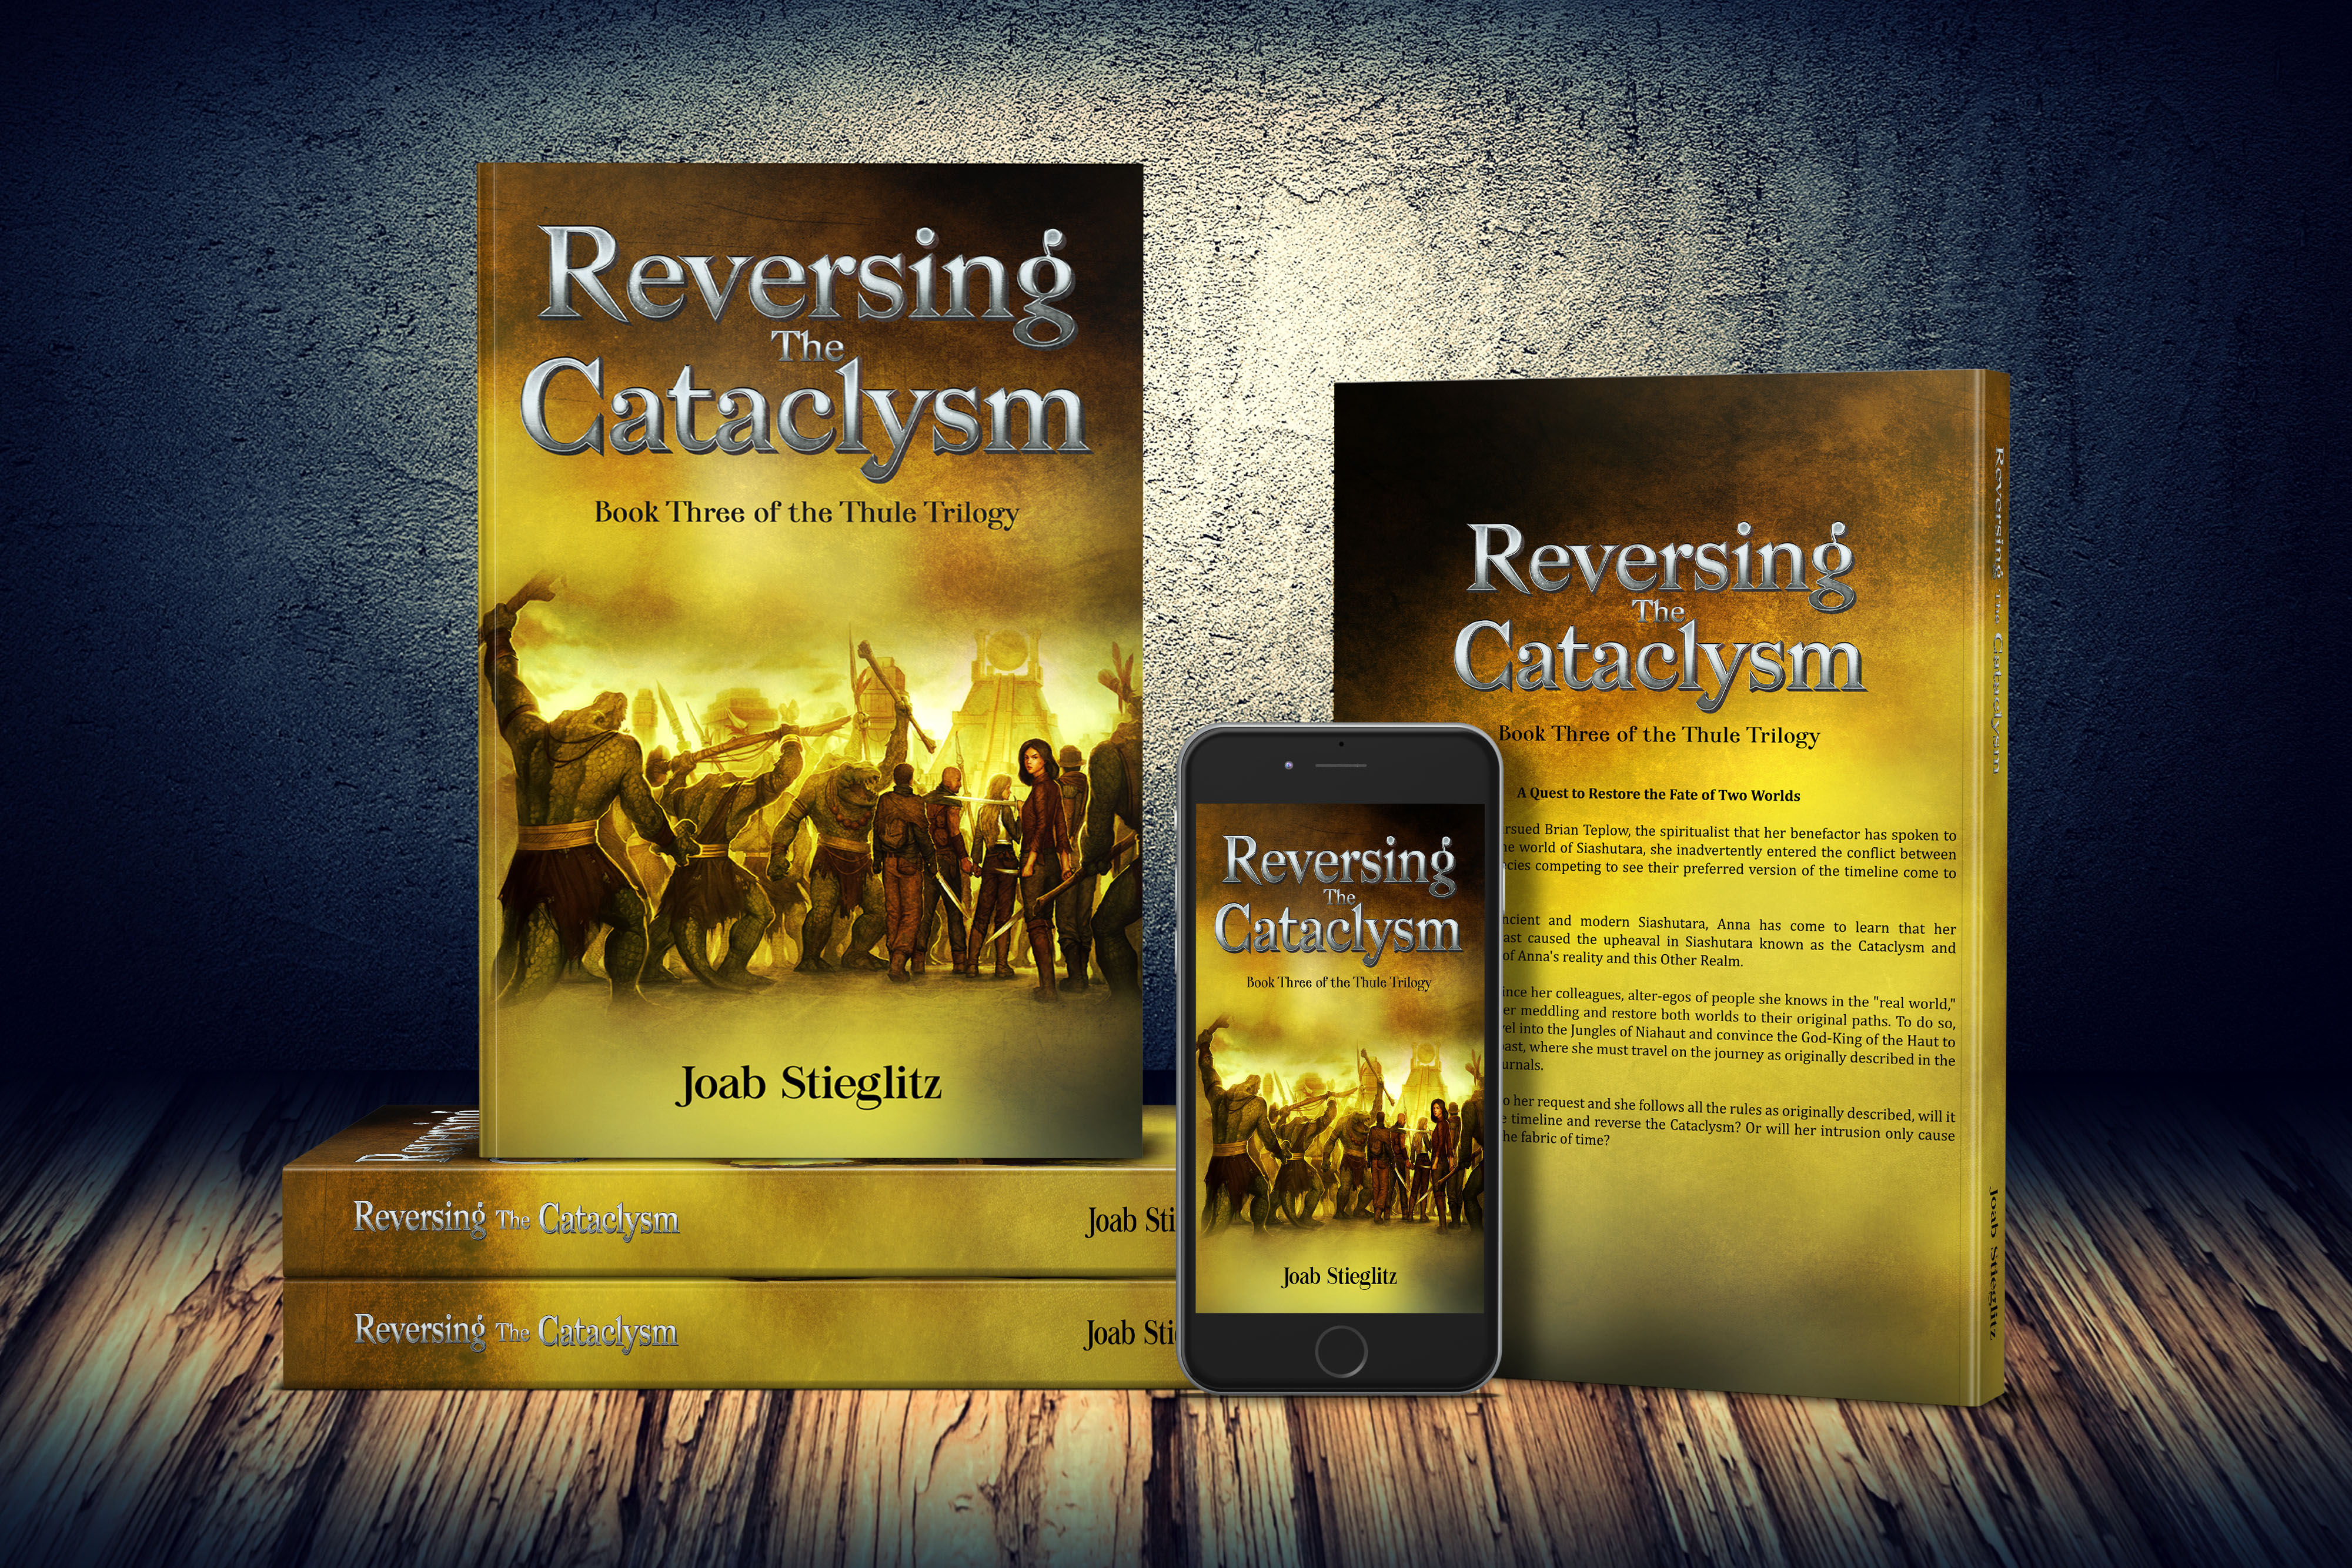 Reversing the Cataclysm: Book Three of the Thule Trilogy Has Been Released